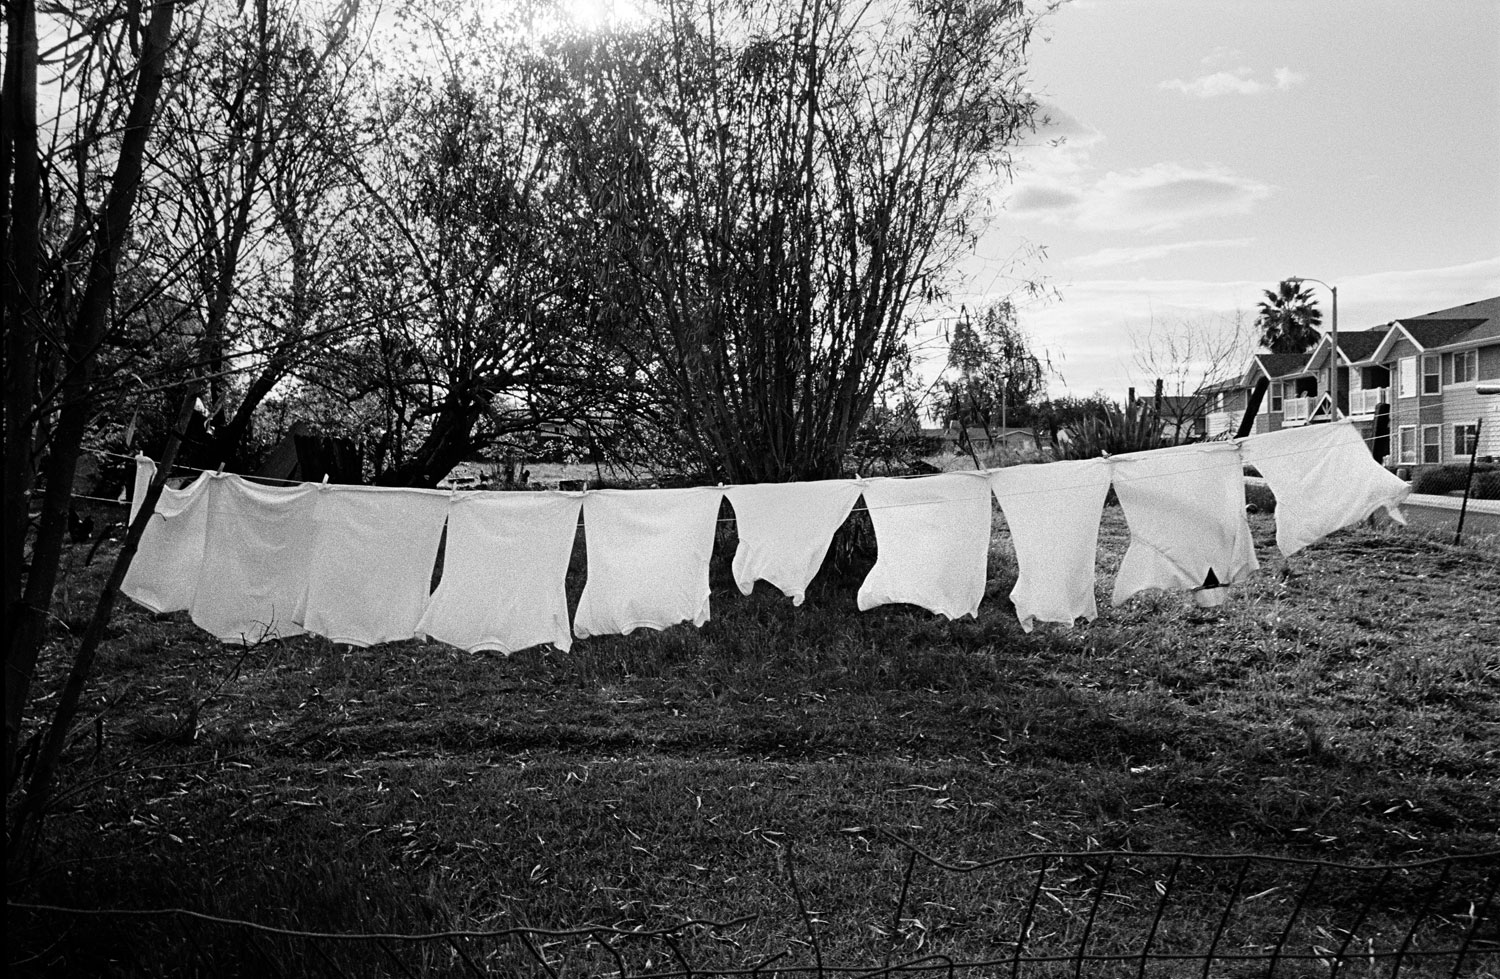 A clothes line, Woodlake, Calif.